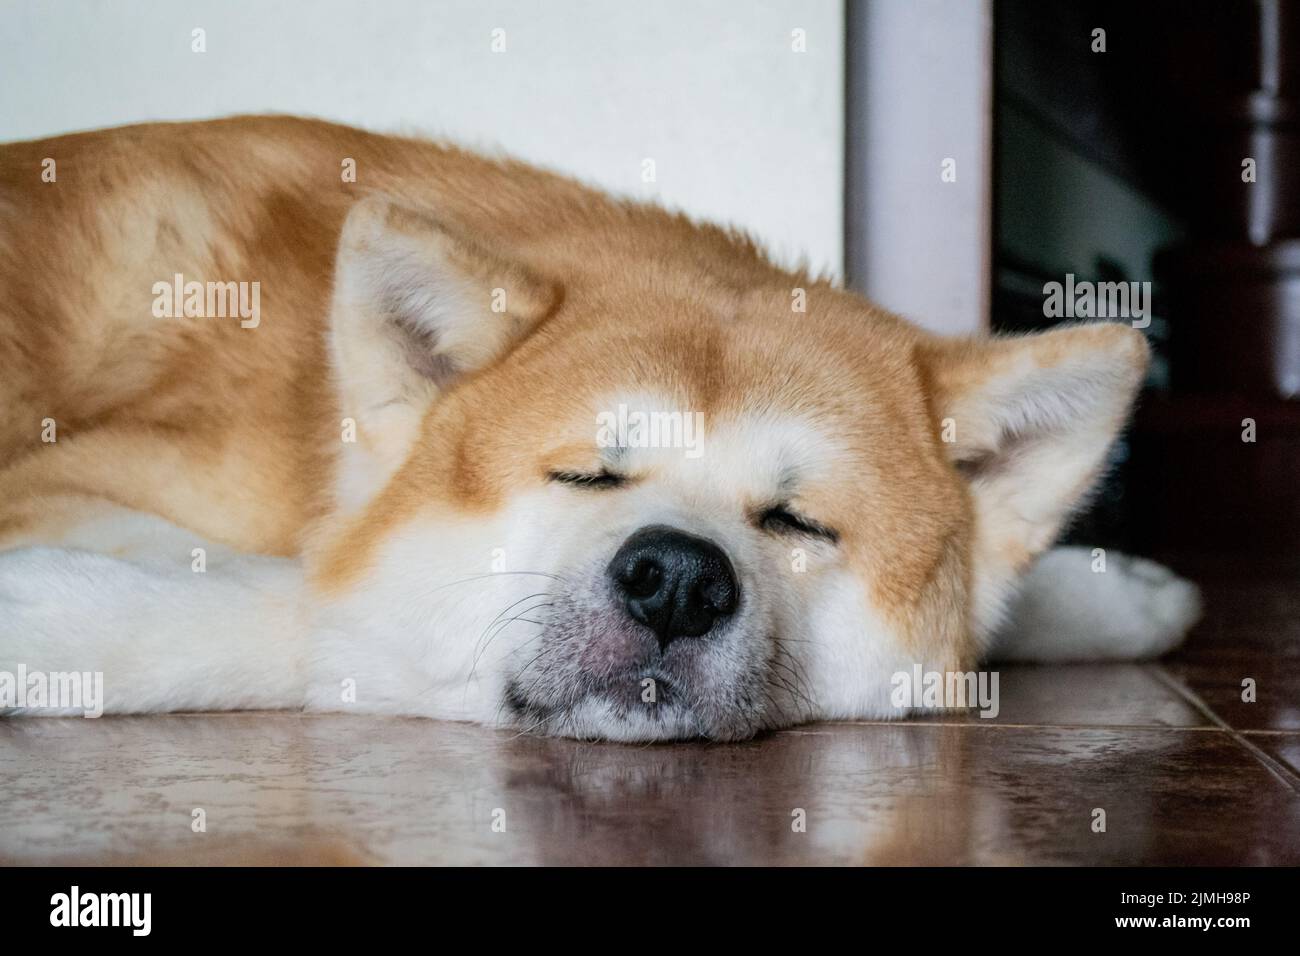 Close-up of the blurred muzzle of a large Akita Inu dog. The pet is napping, resting on the floor. Stock Photo